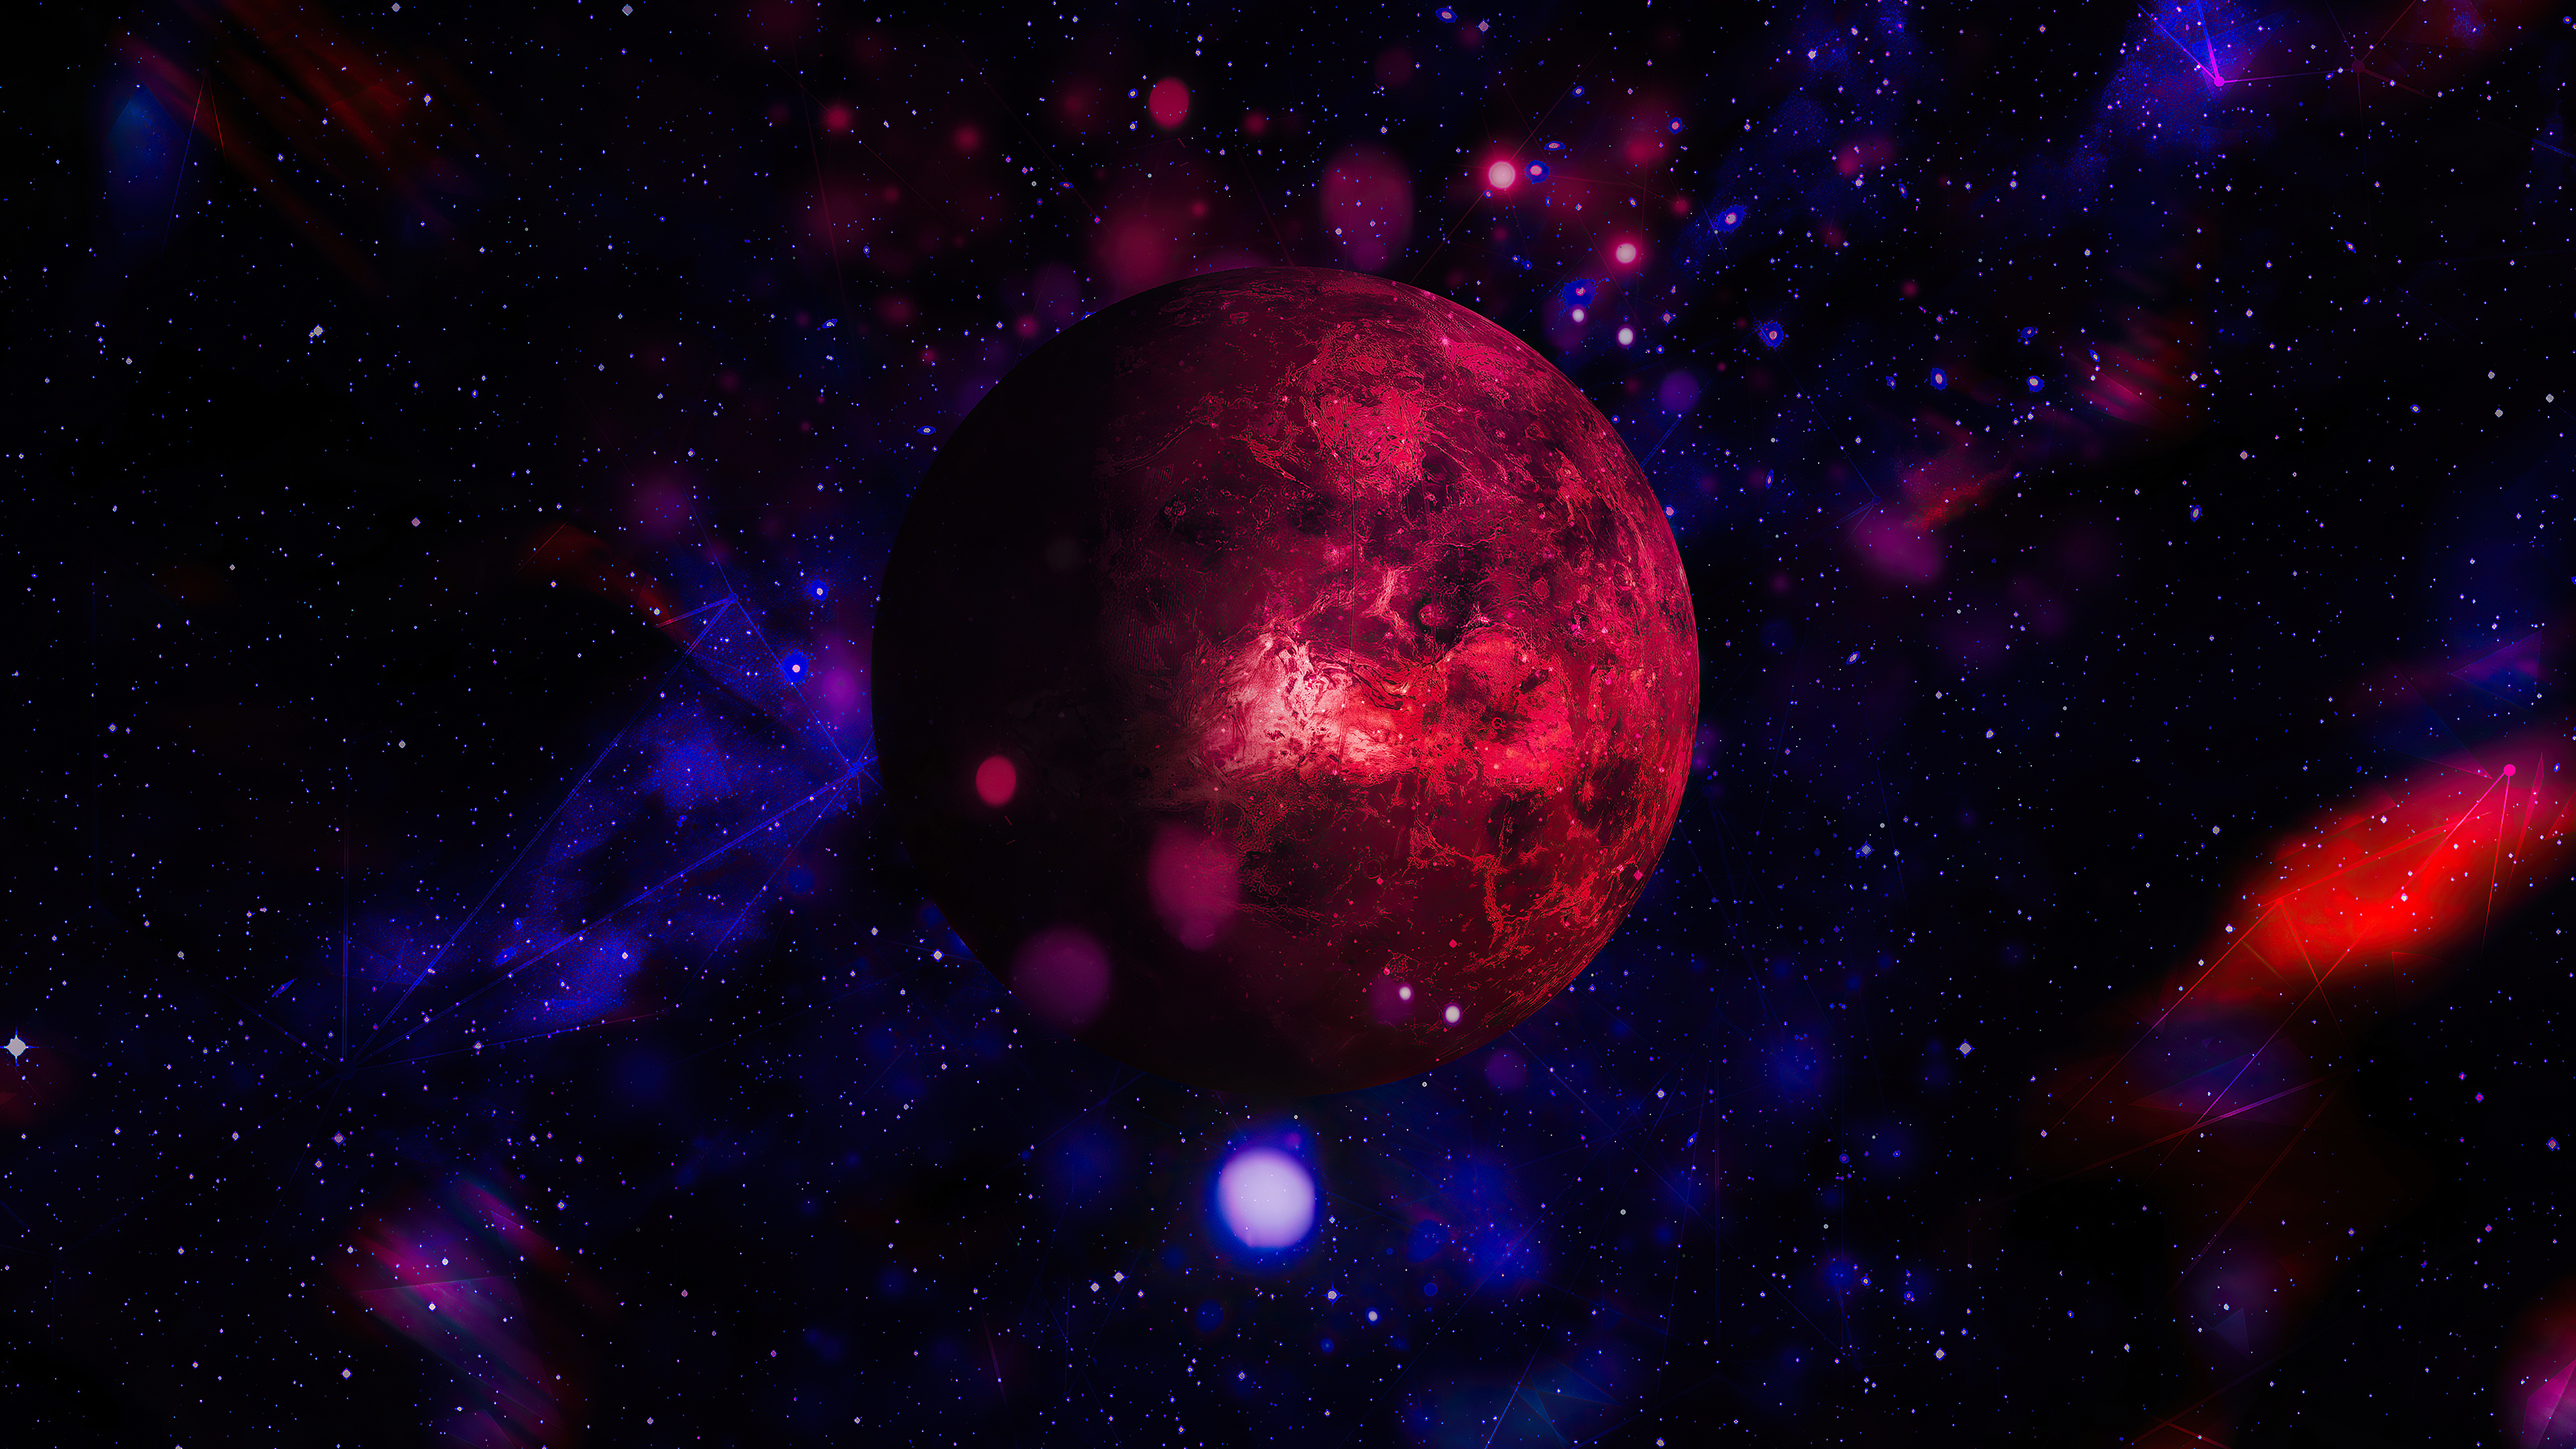 Space Wallpaper 1920x1080 Red